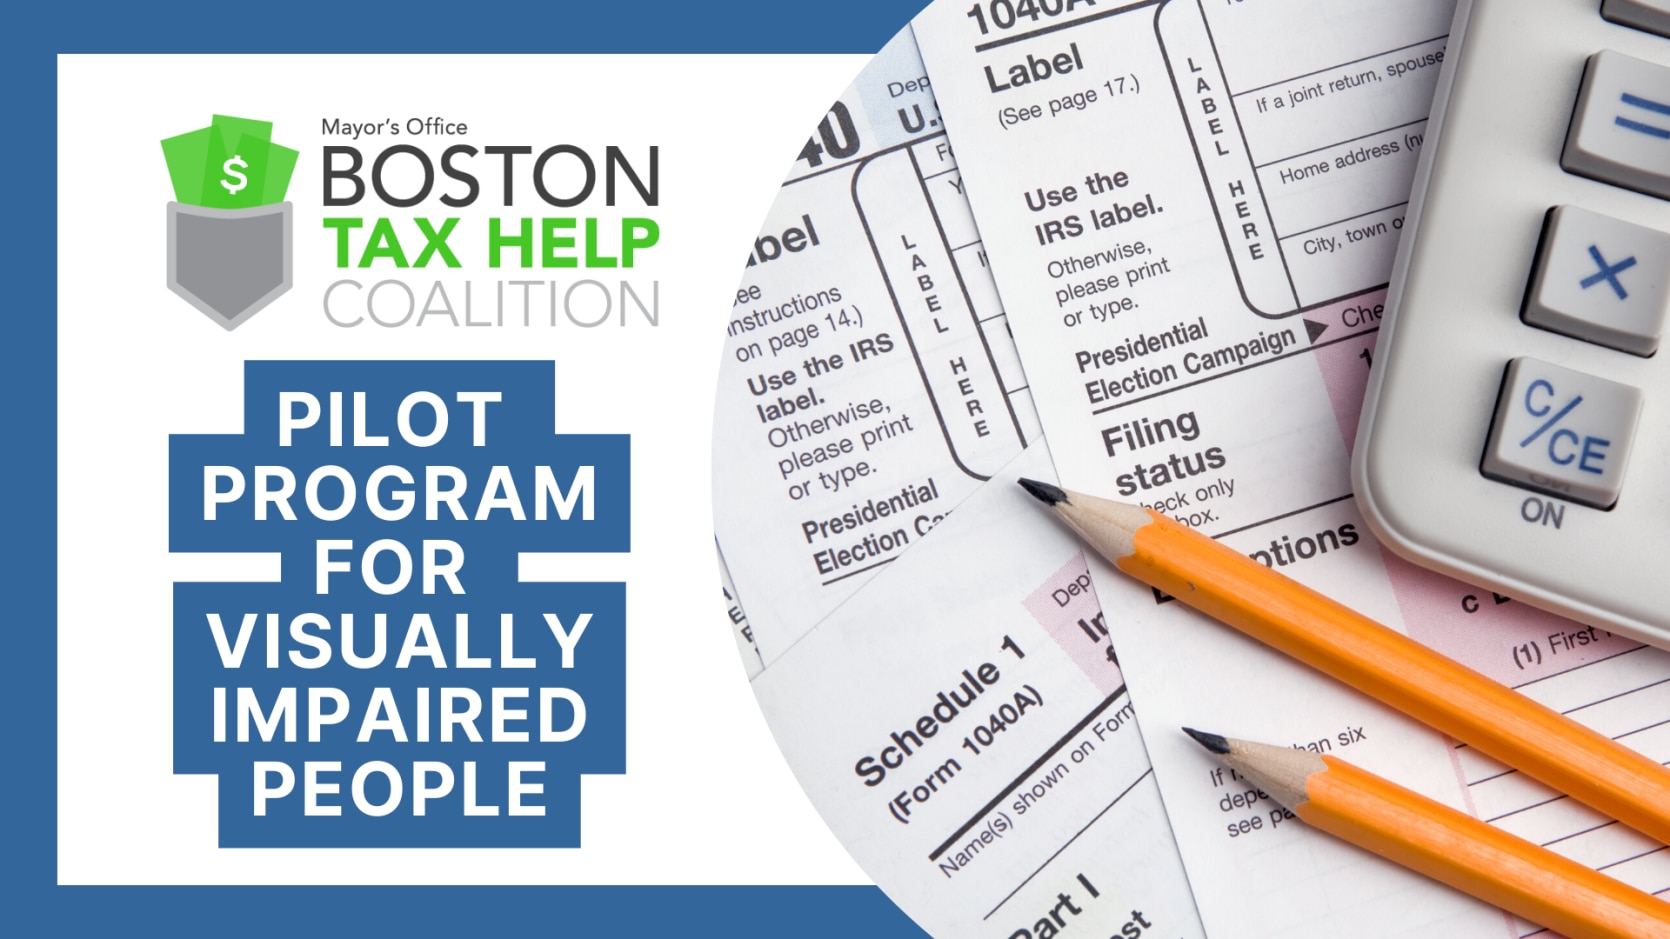 A photo of tax forms, a calculator and 2 pencils along with the Boston Tax Help Coalition logo and the text, Pilot Program for Visually Impaired People